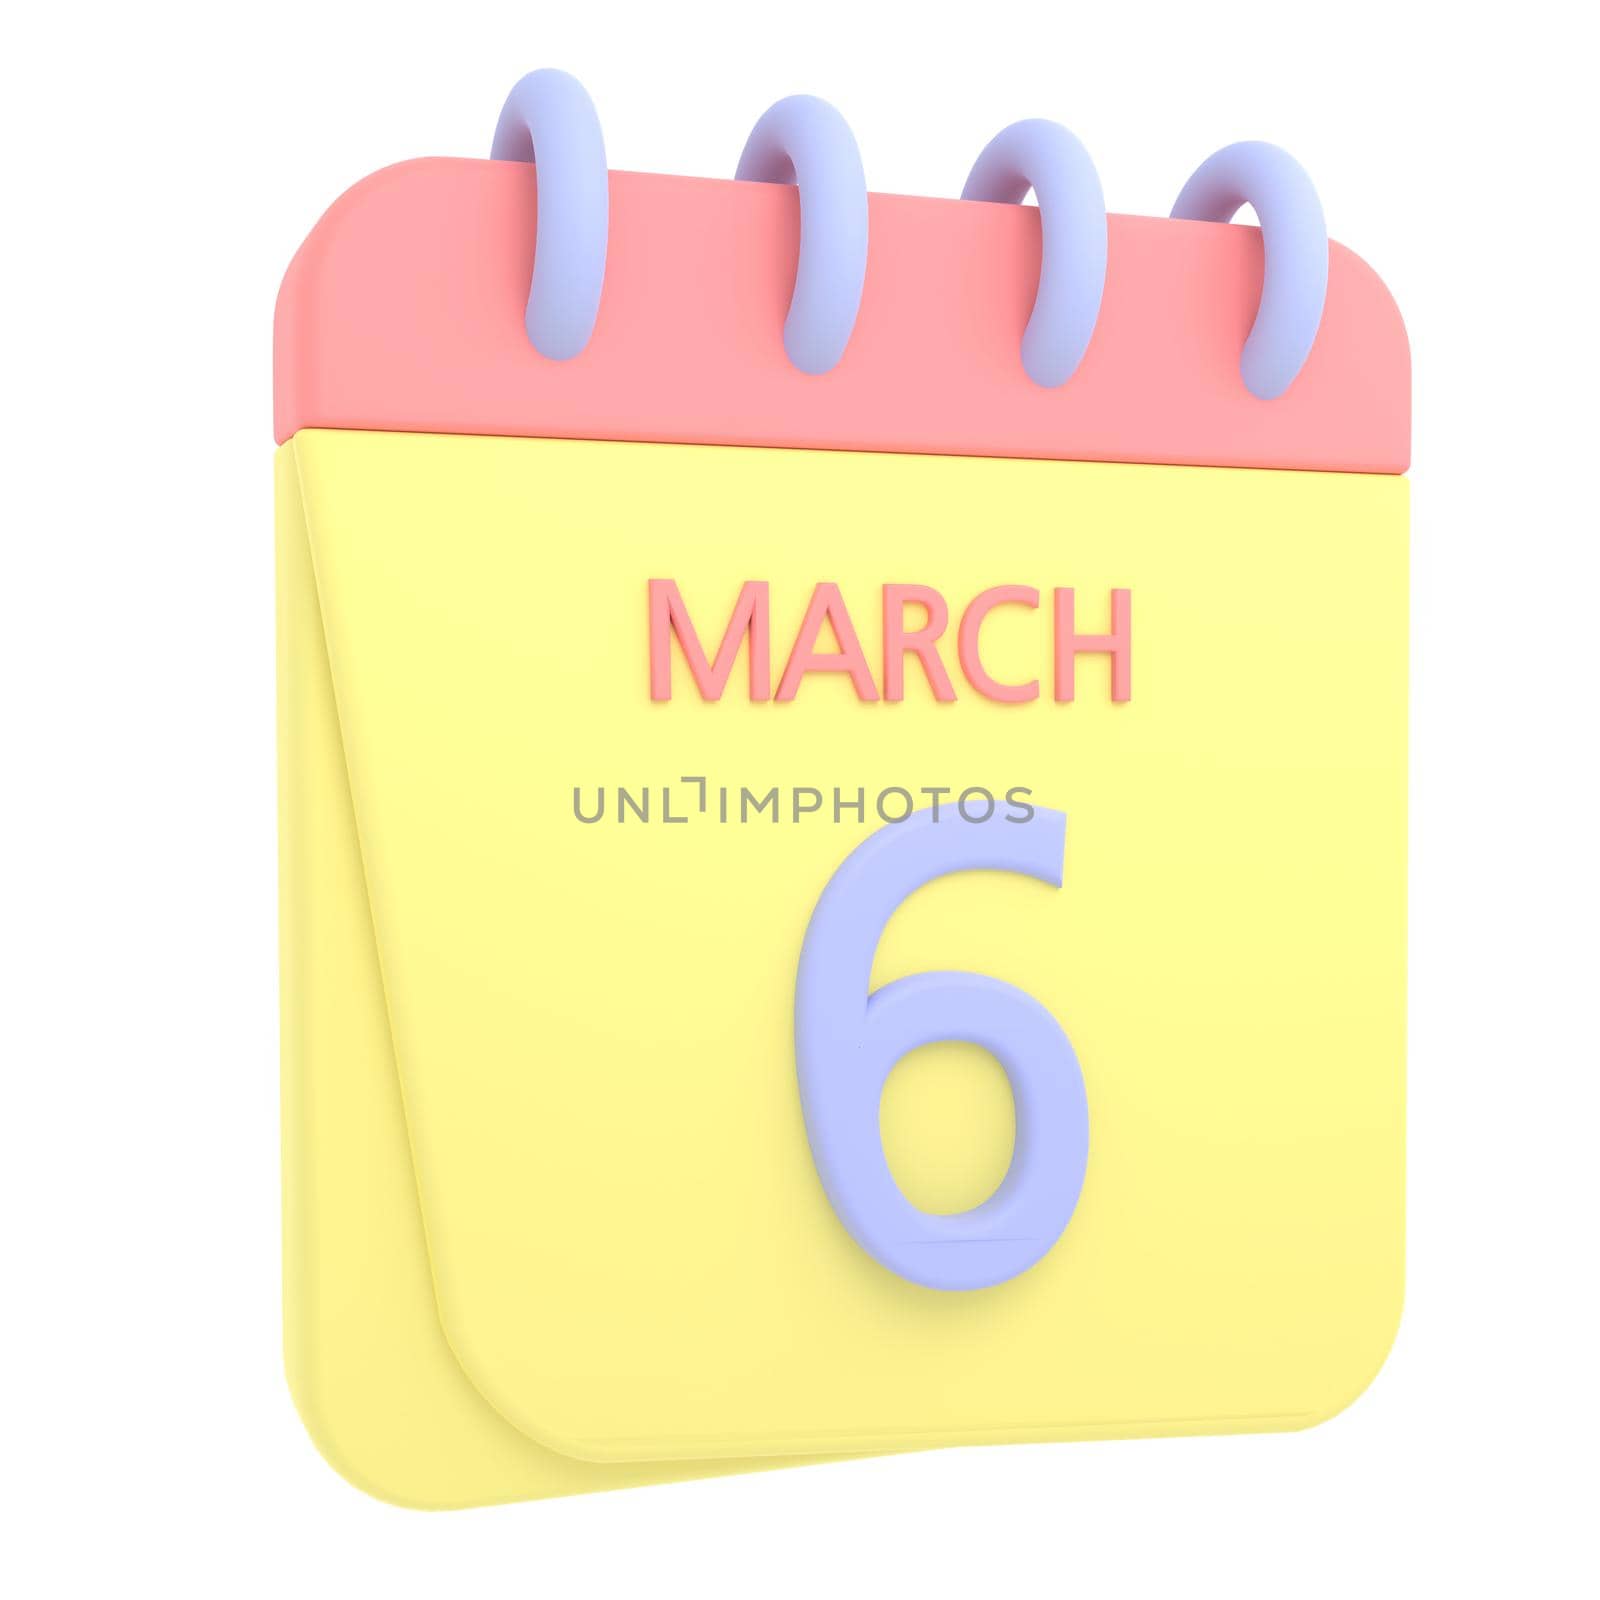 6th March 3D calendar icon. Web style. High resolution image. White background